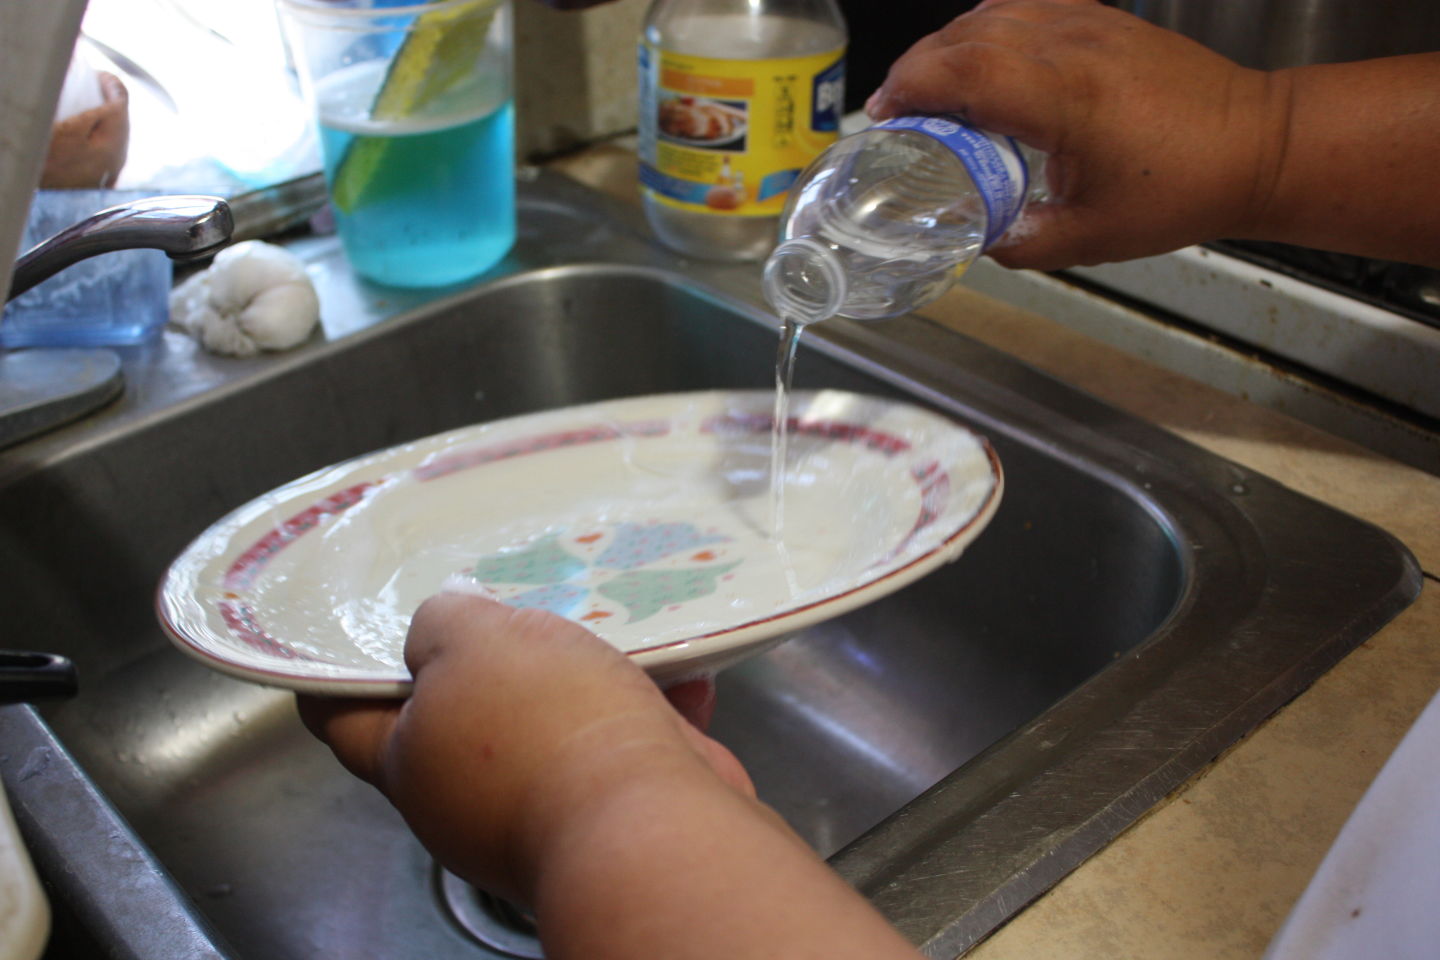 Without a working faucet, Maria Medina washes dishes with little 16-ounce water bottles. She says each dish requires about half a bottle.  Kerry Klein/KQED